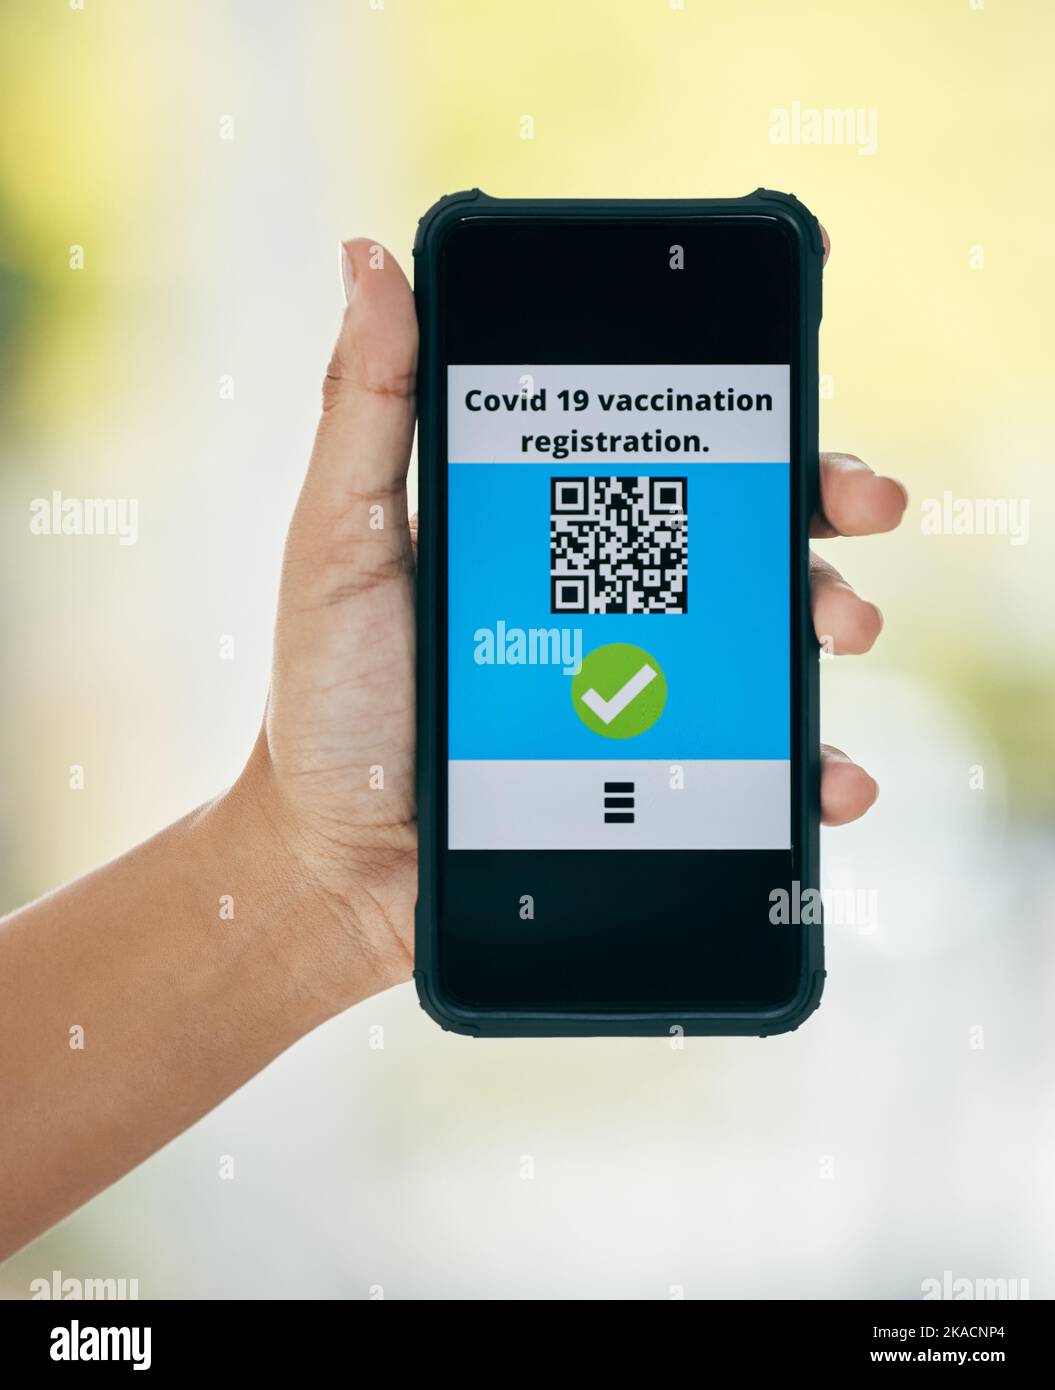 Hand, vaccination and qr code on app on a phone for registration for travel safety or protection. Covid vaccine, barcode and digital certificate on Stock Photo